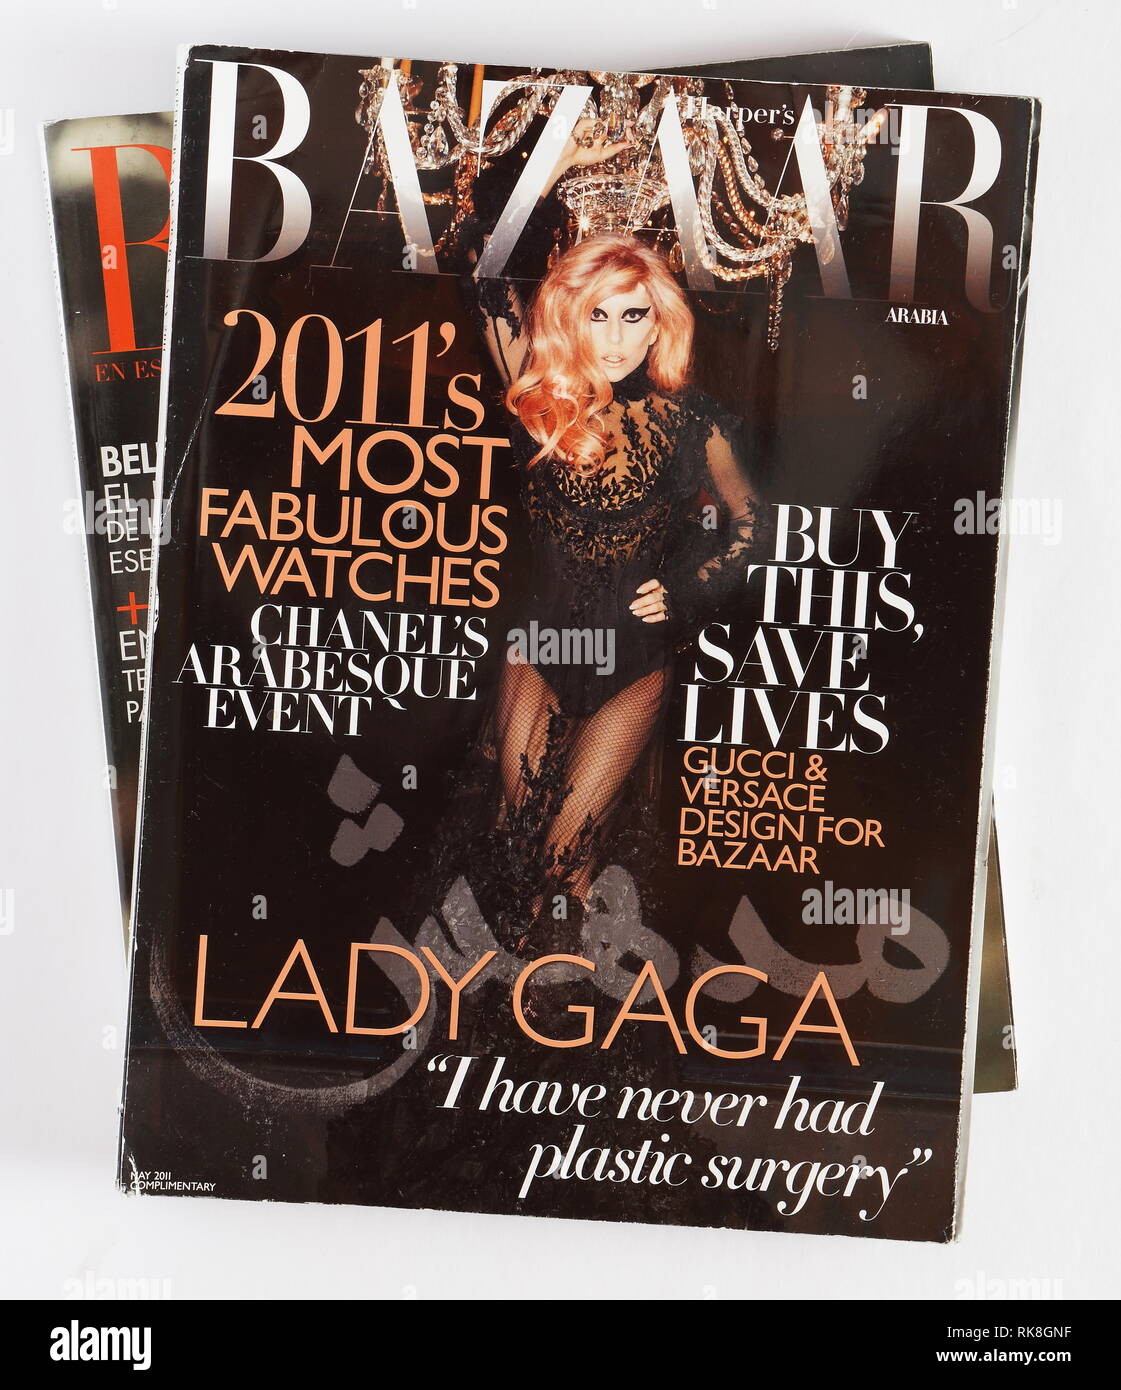 CZECH - MAY 21, 2015: Stack of magazines Harpers Bazaar, on top issue May  2011 with Lady Gaga on cover. Editorial use only. Illustrative editorial  Stock Photo - Alamy